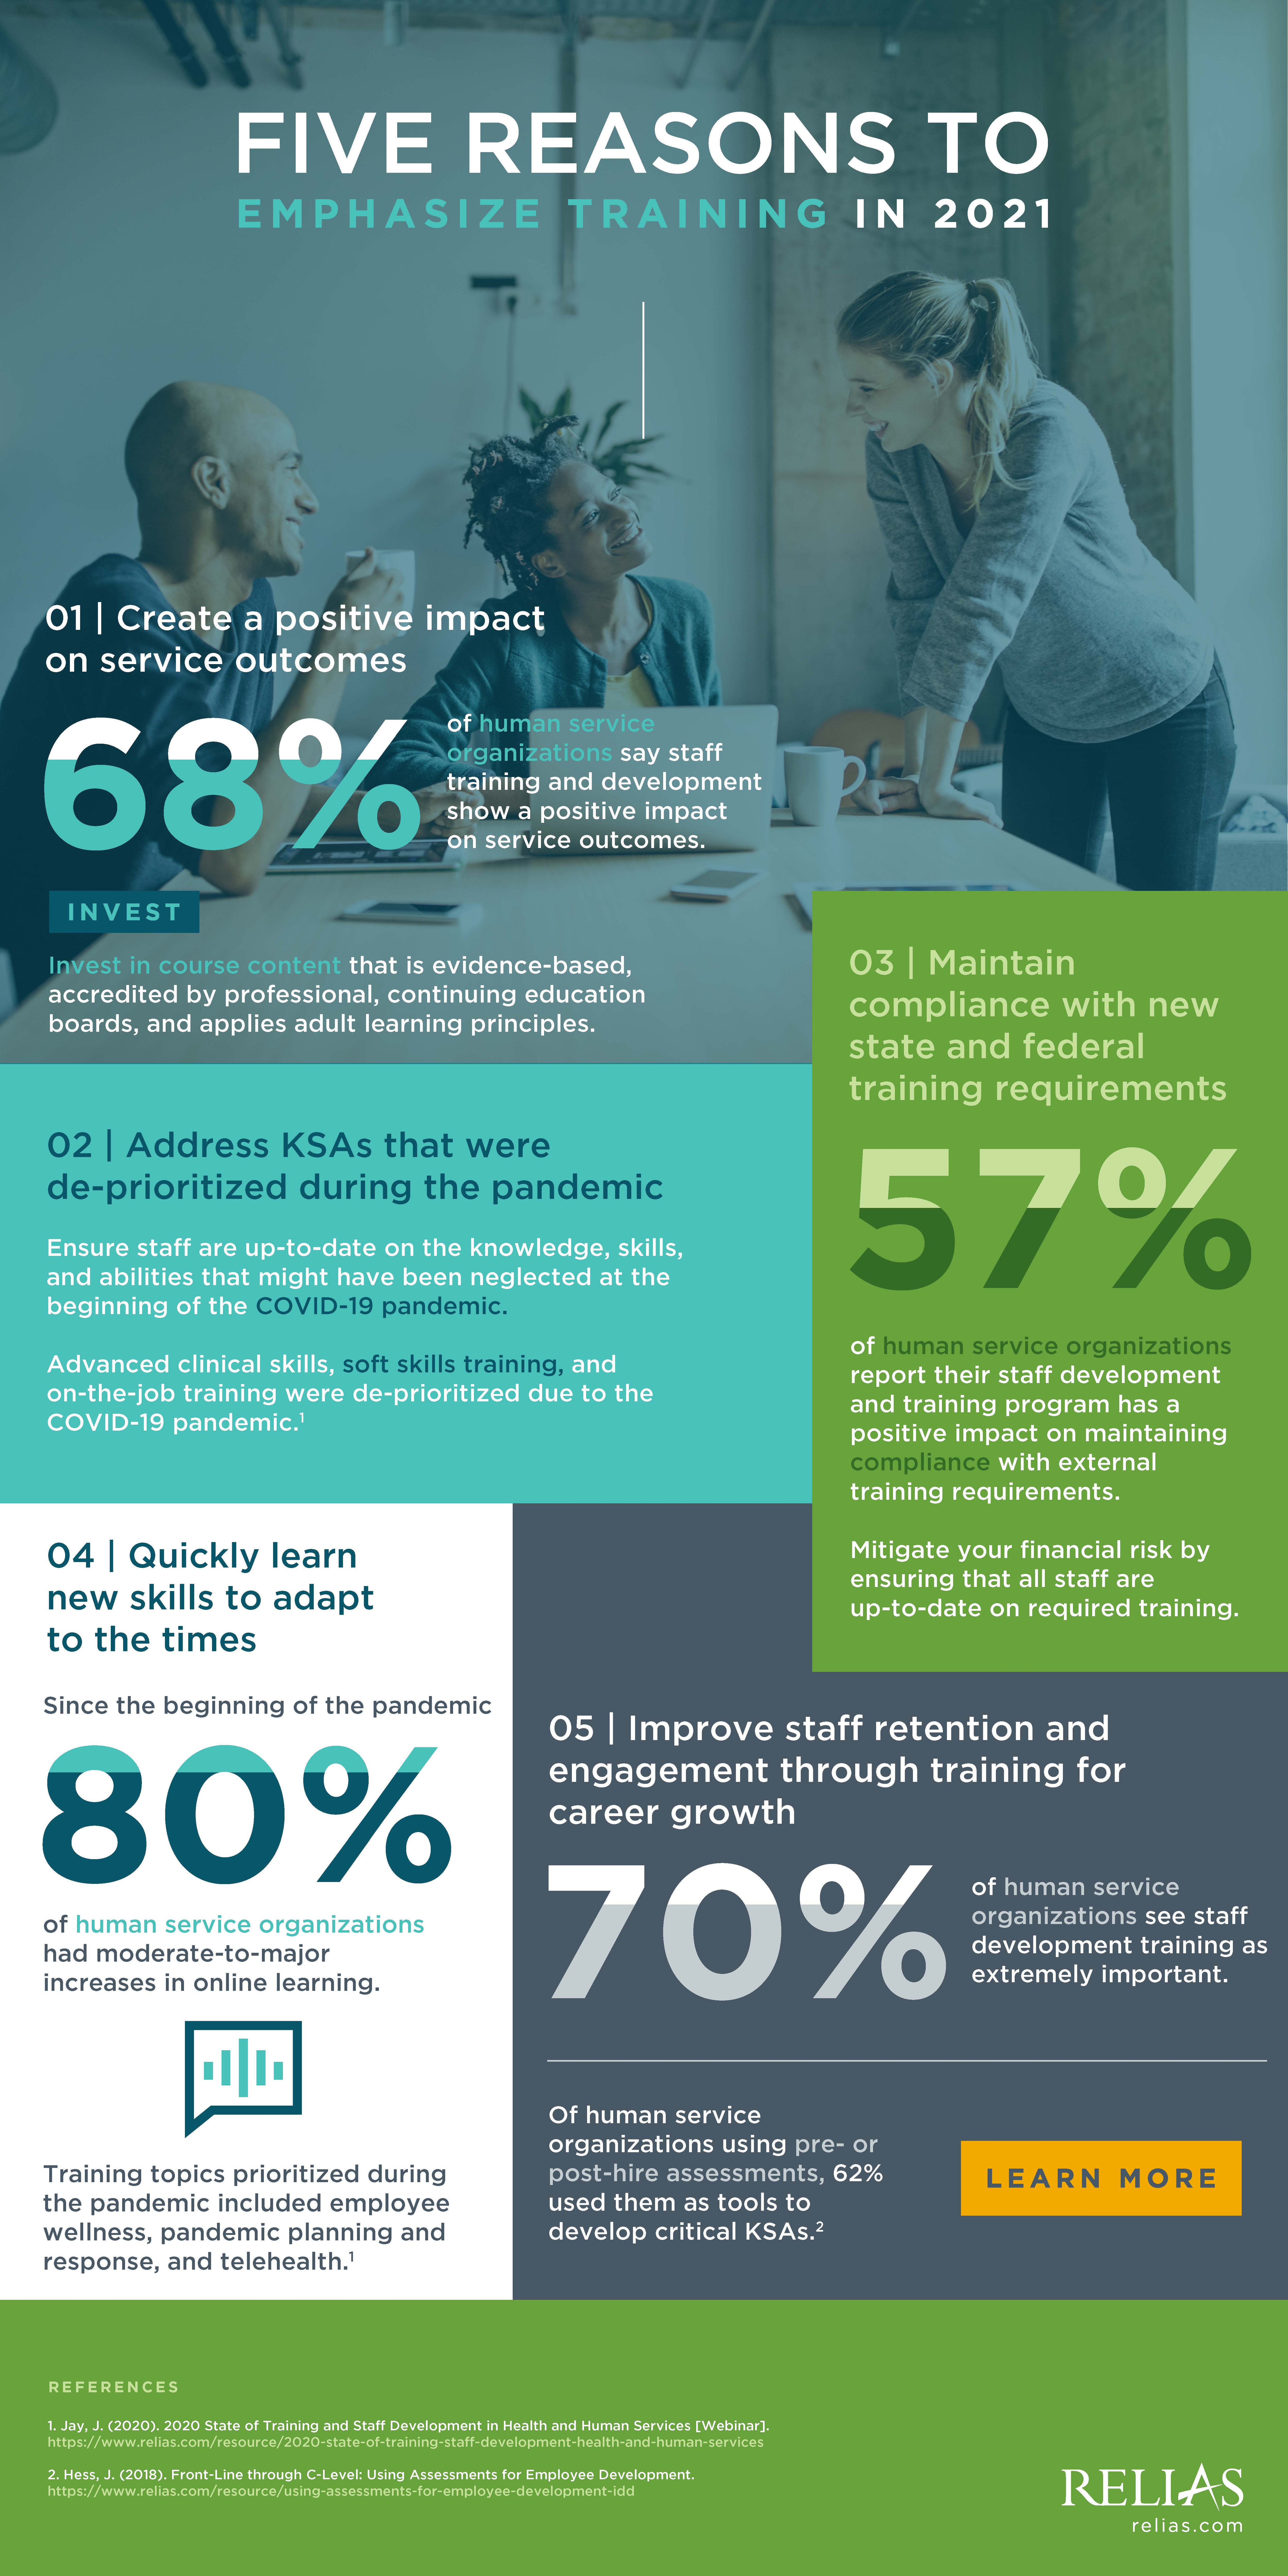 5 Reasons to Emphasize Training in 2021 infographic